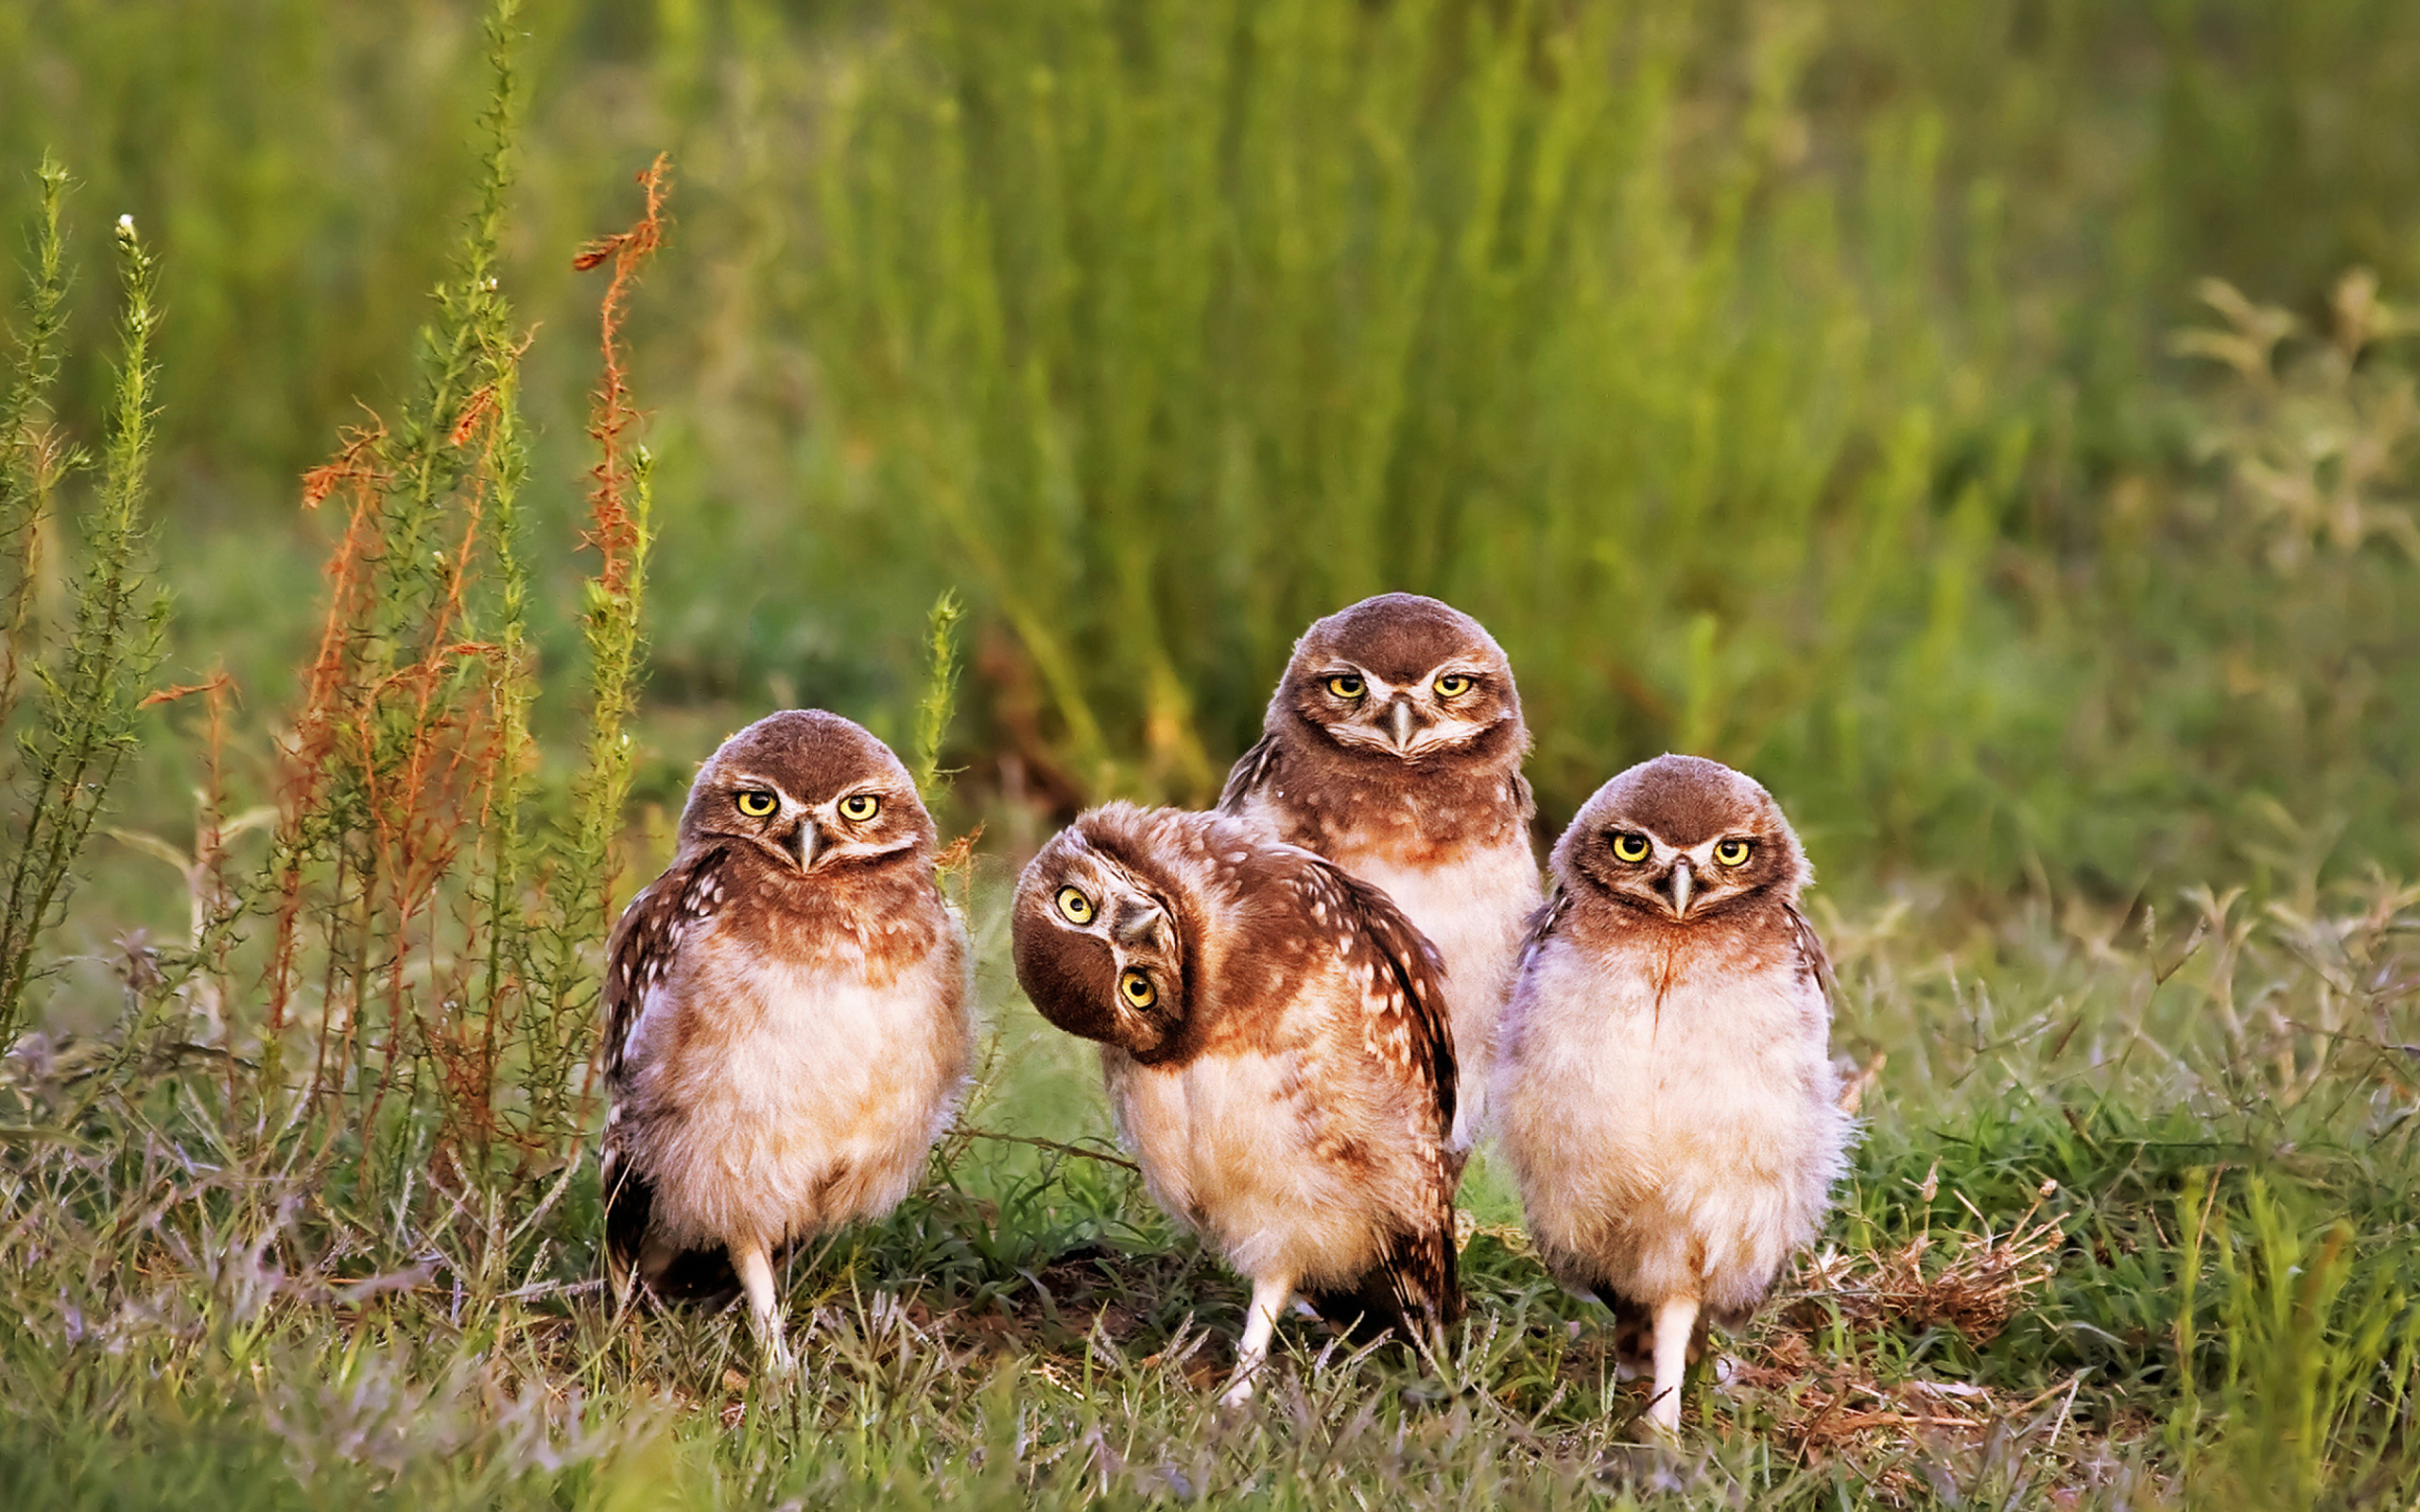 Morning with owls wallpaper 2560x1600